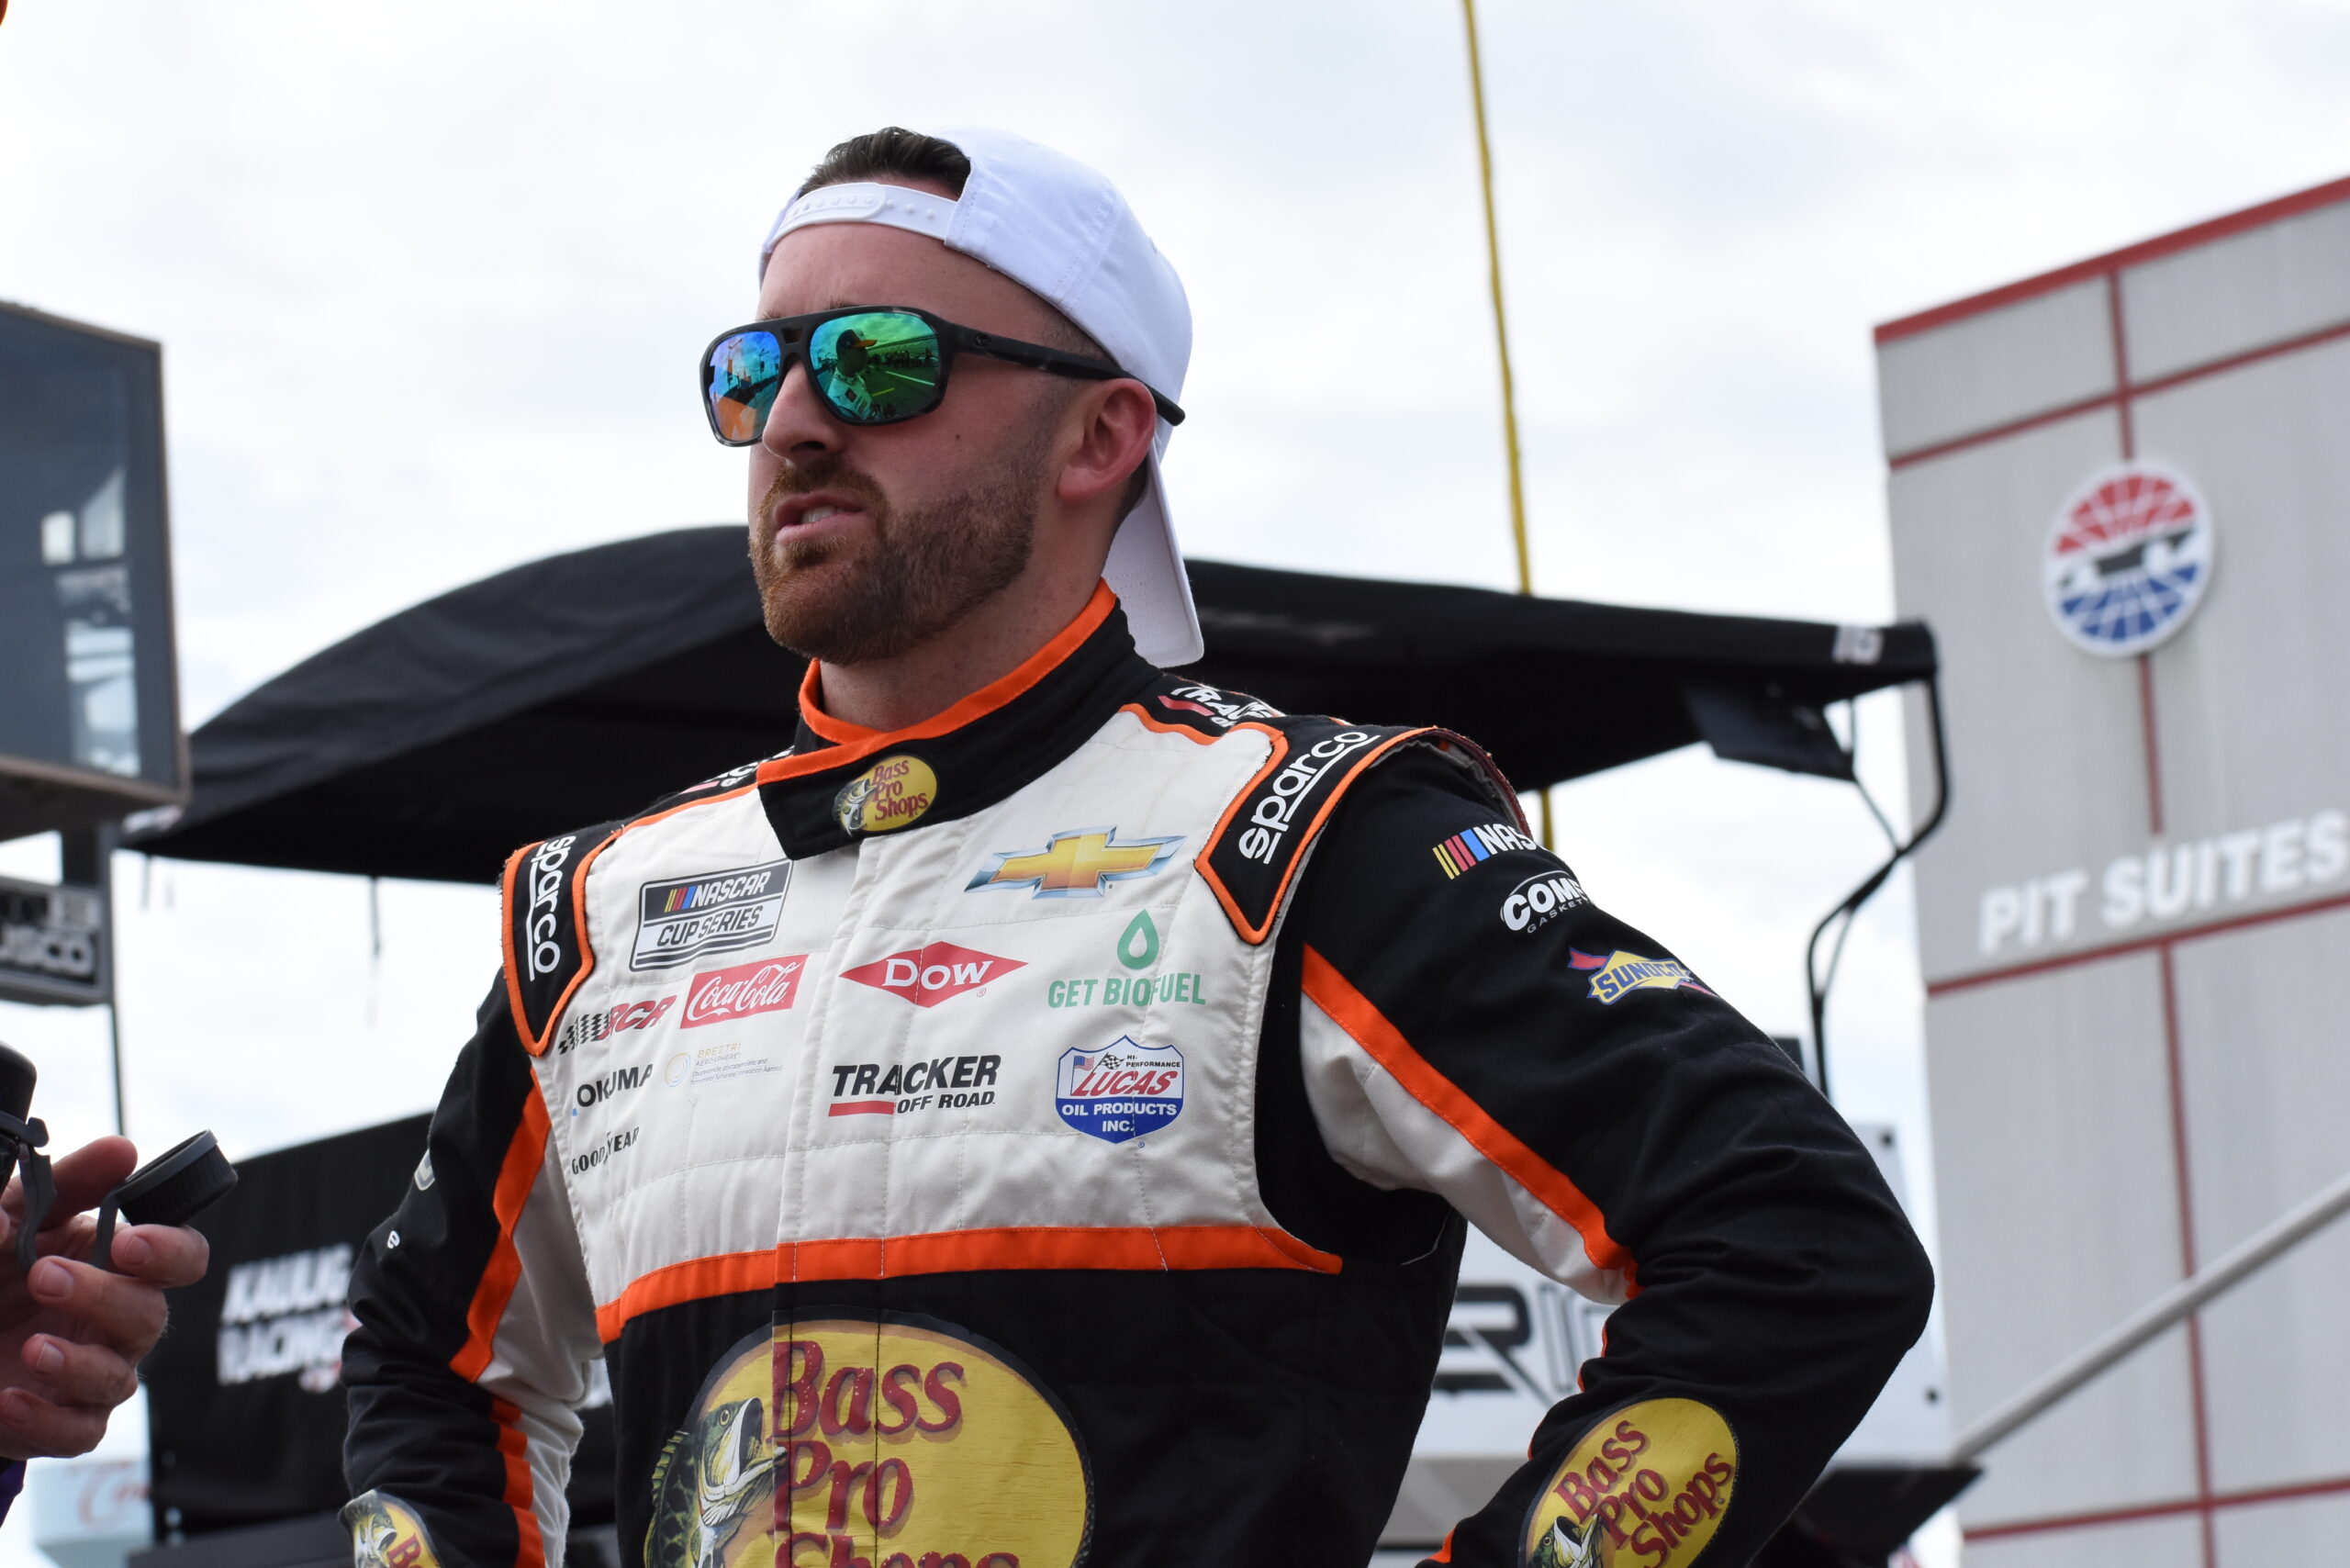 Surely, Austin Dillon blends personality with his on track determination throughout his career. (Photo: Michael Guariglia/The Podium Finish)